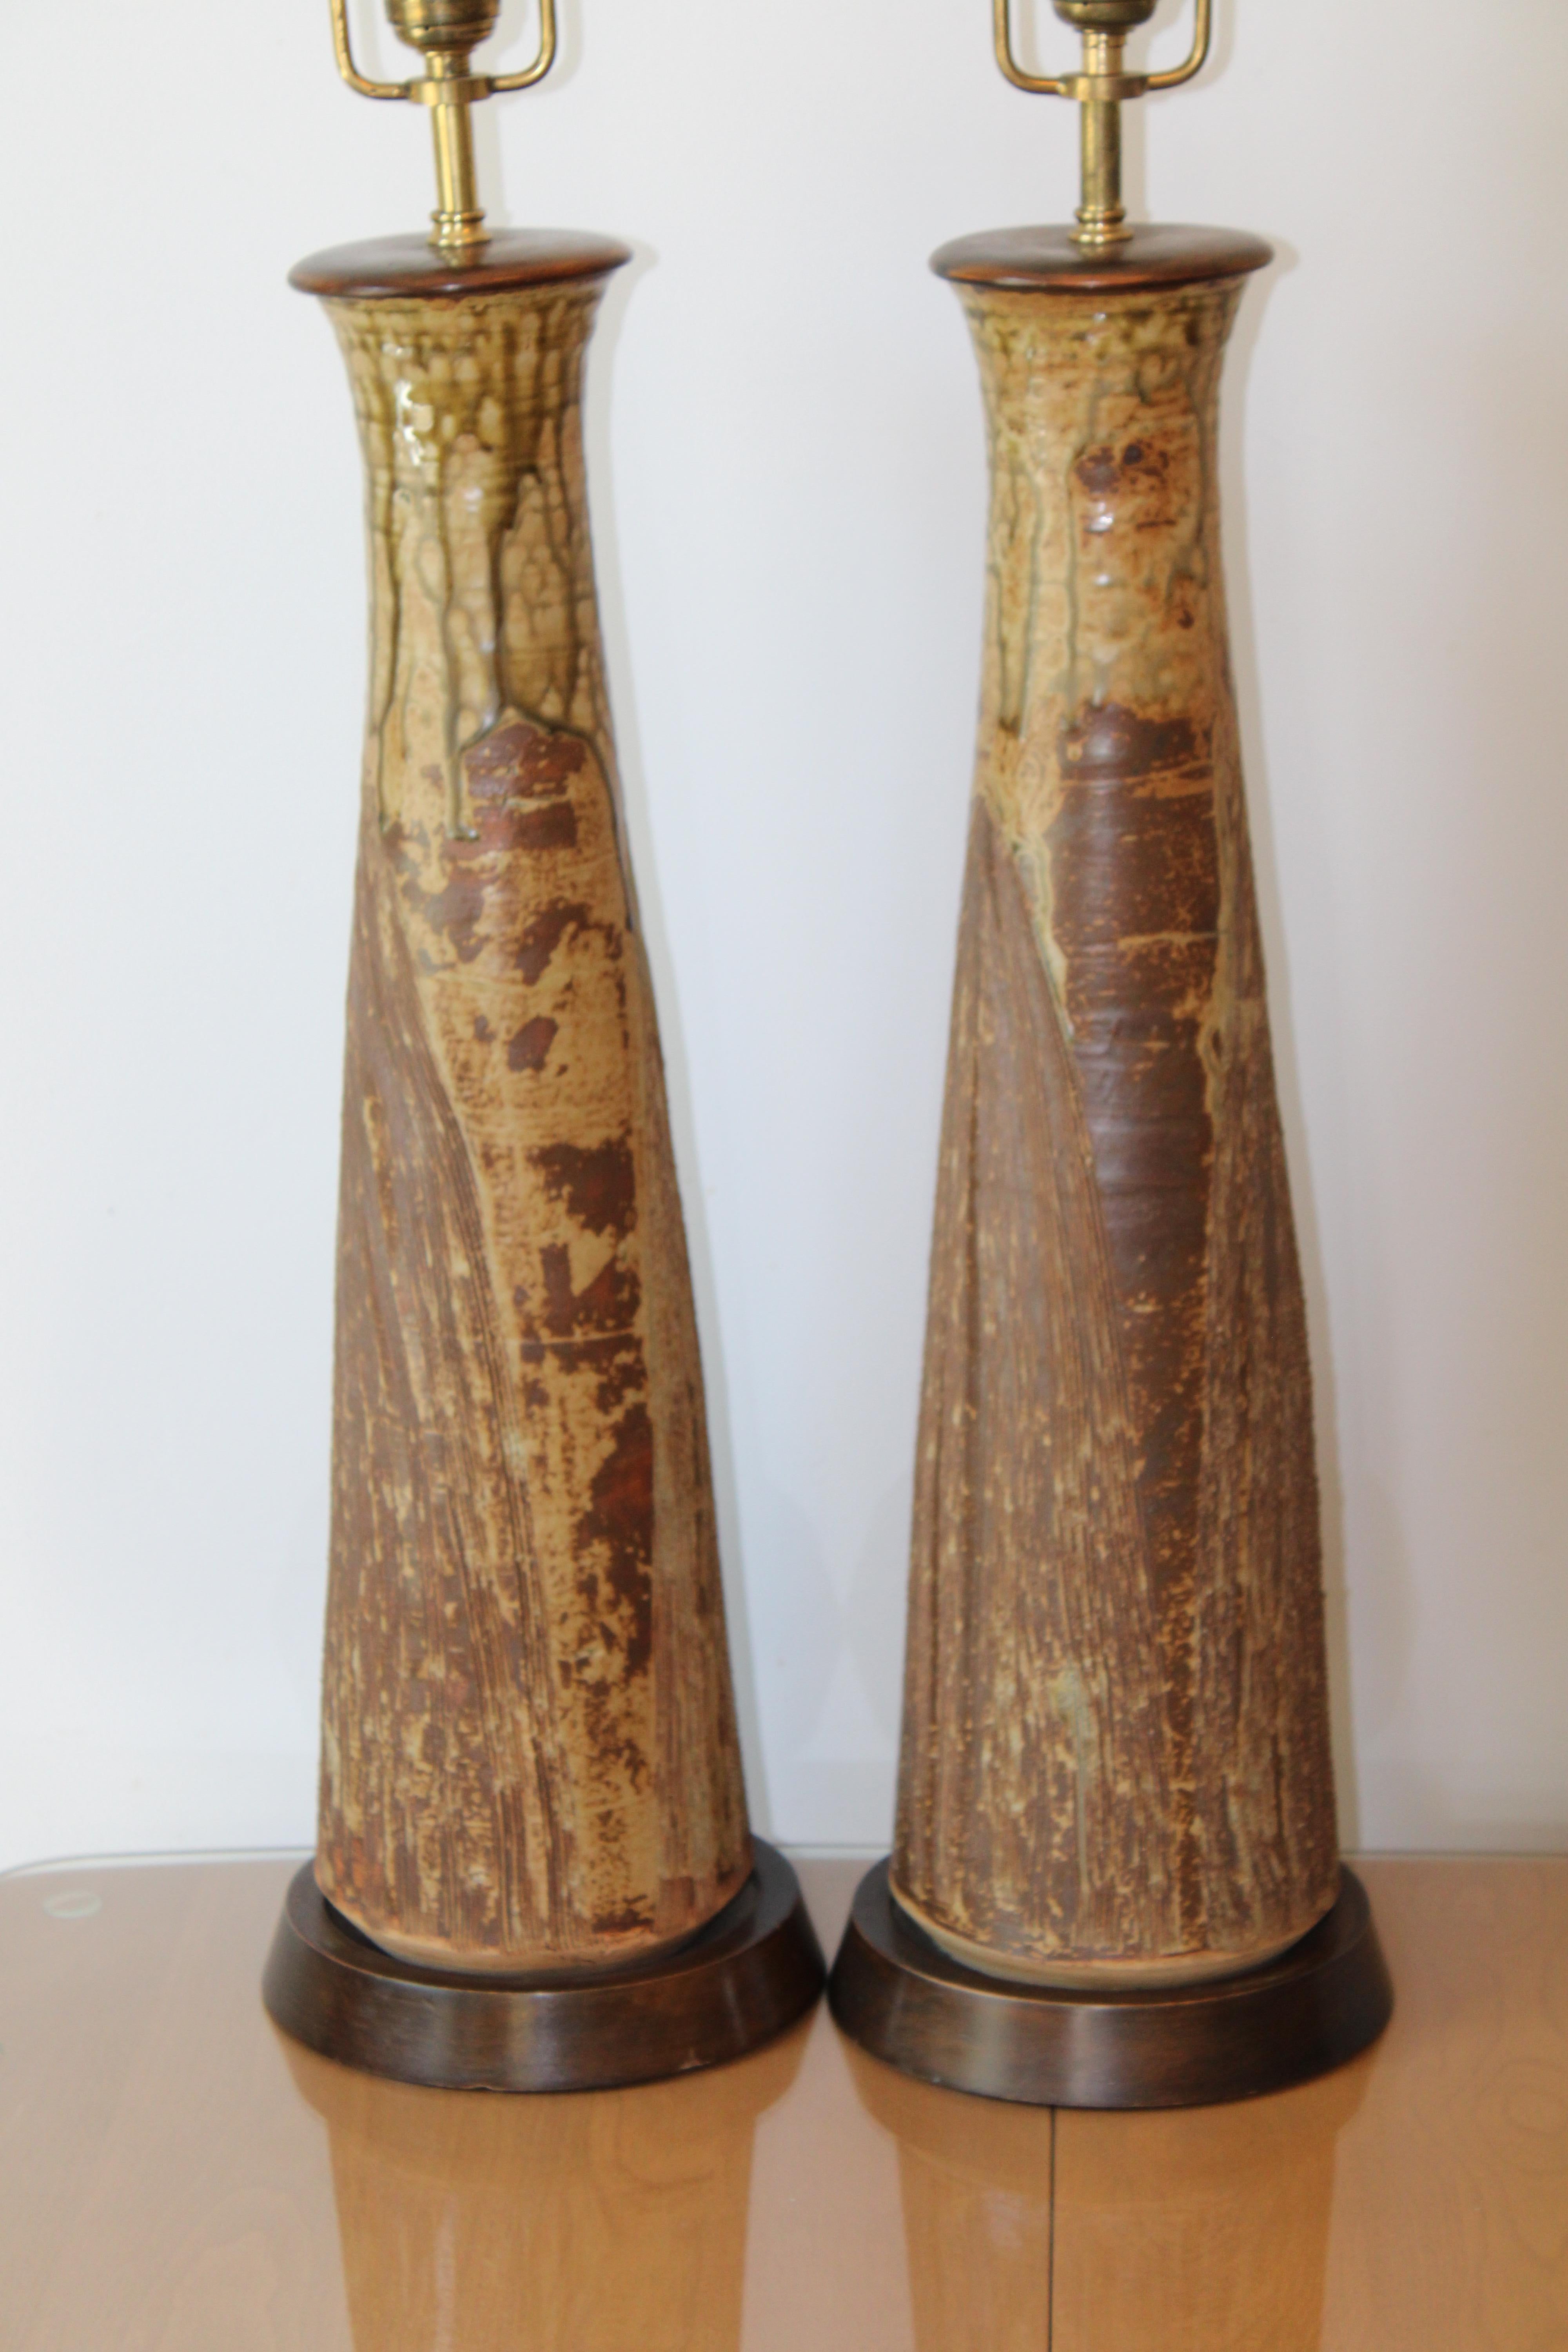 Pair of all hand thrown stoneware lamps with heavily incised surfaces and olive green drip glaze. Each lamp measures about 25